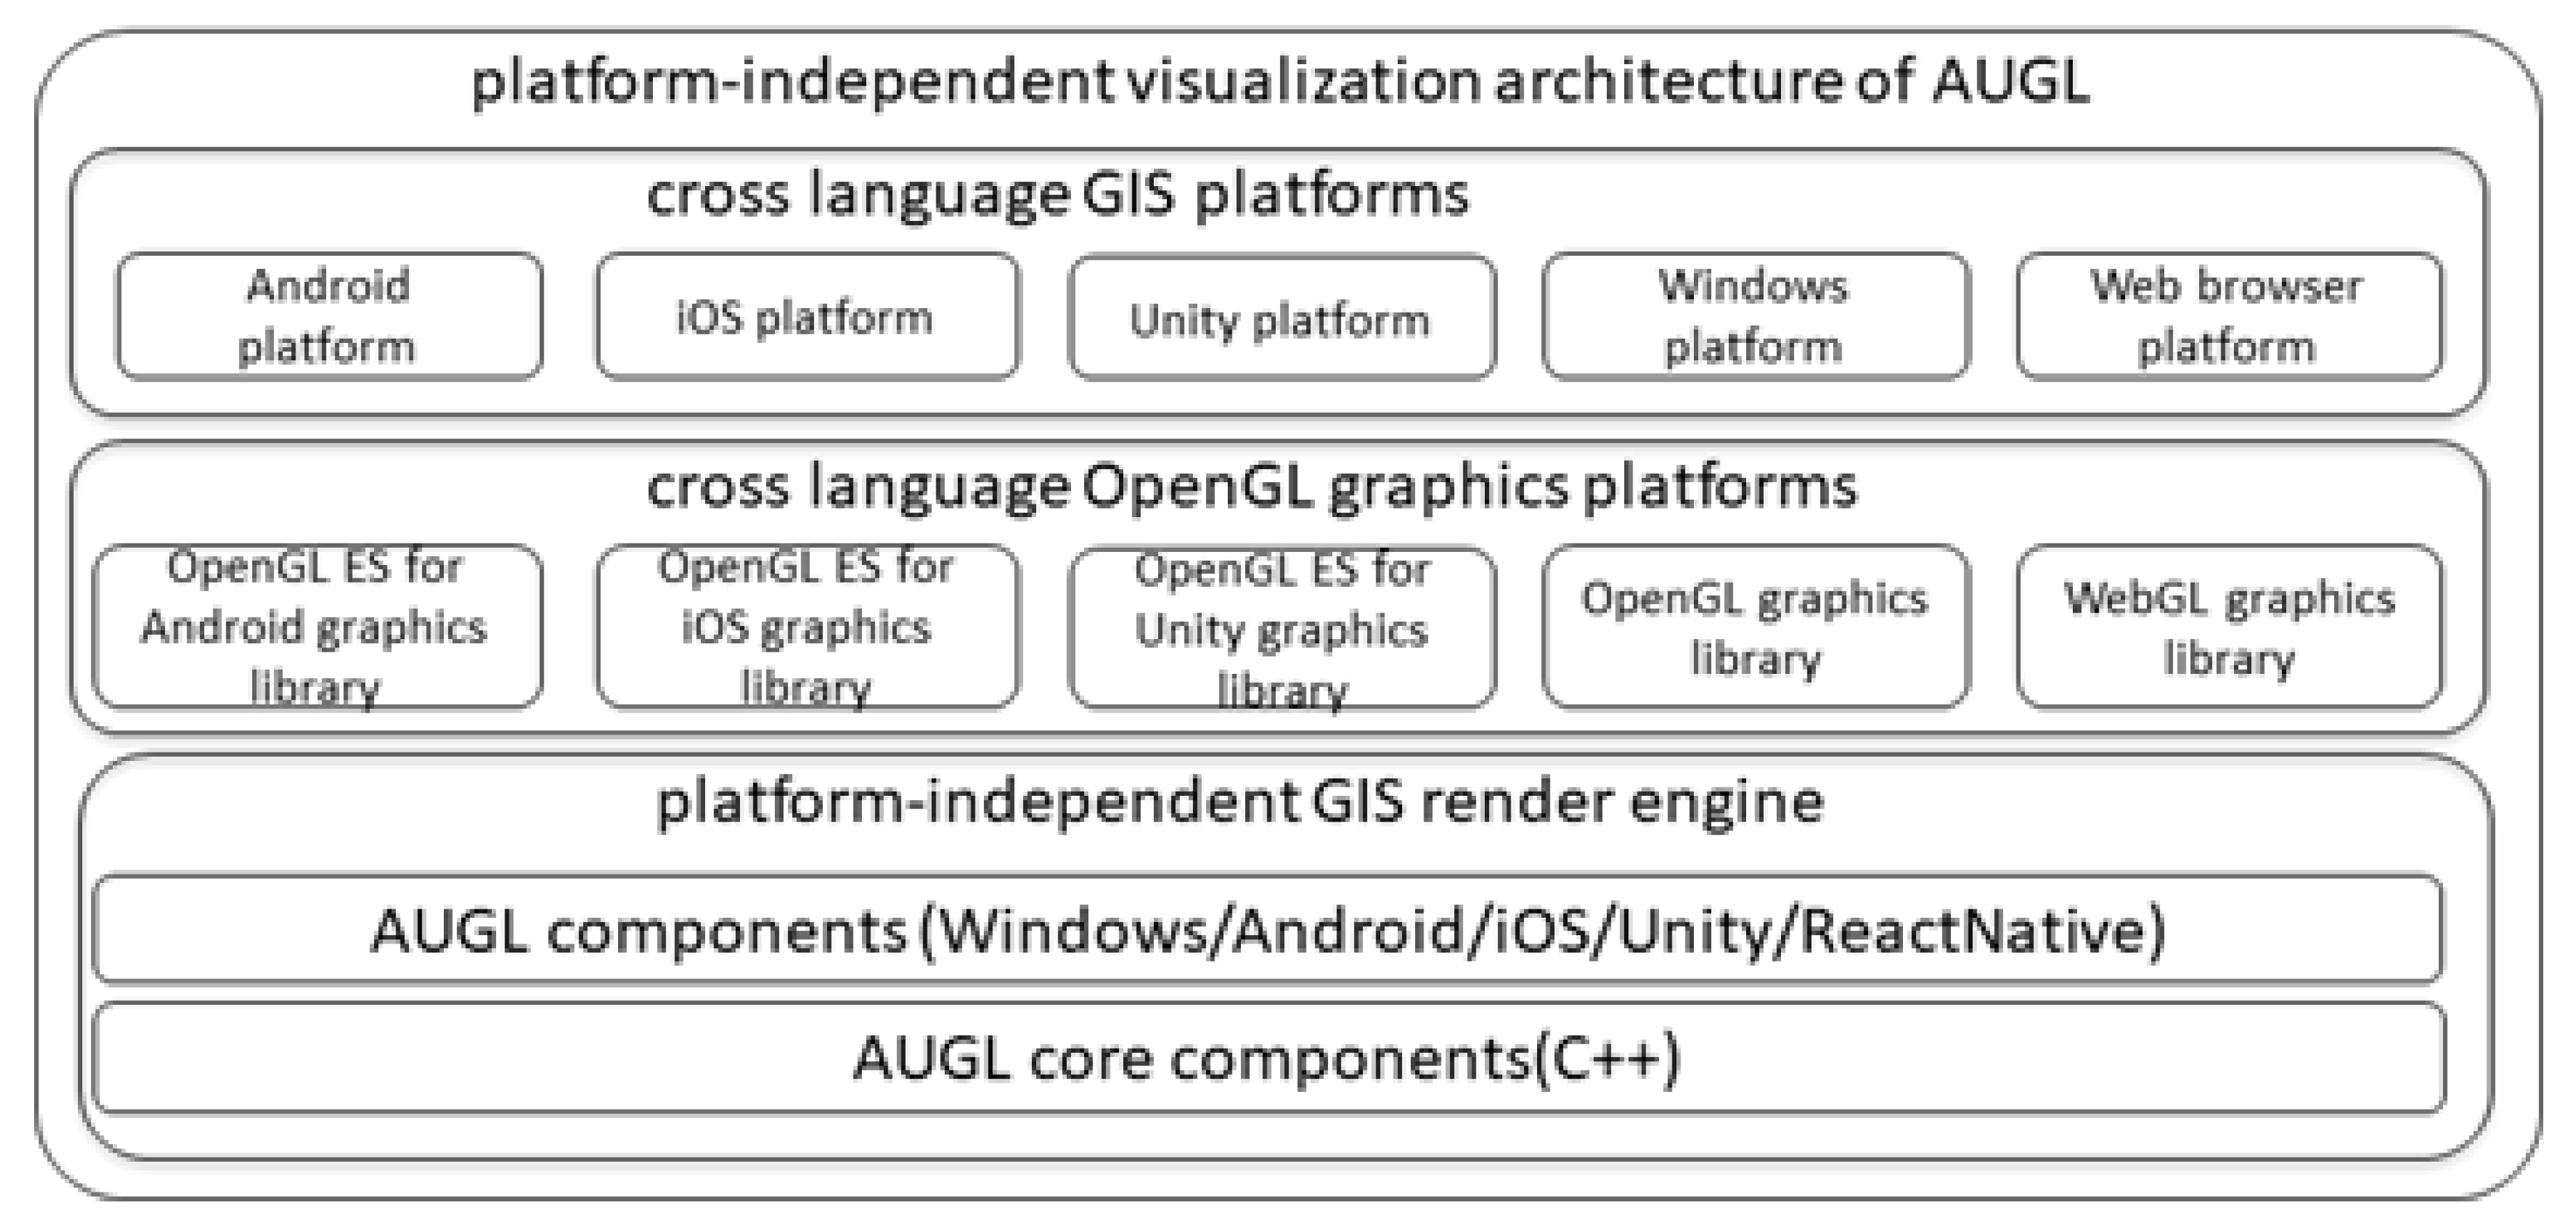 opengl 4.1 renderer not supported